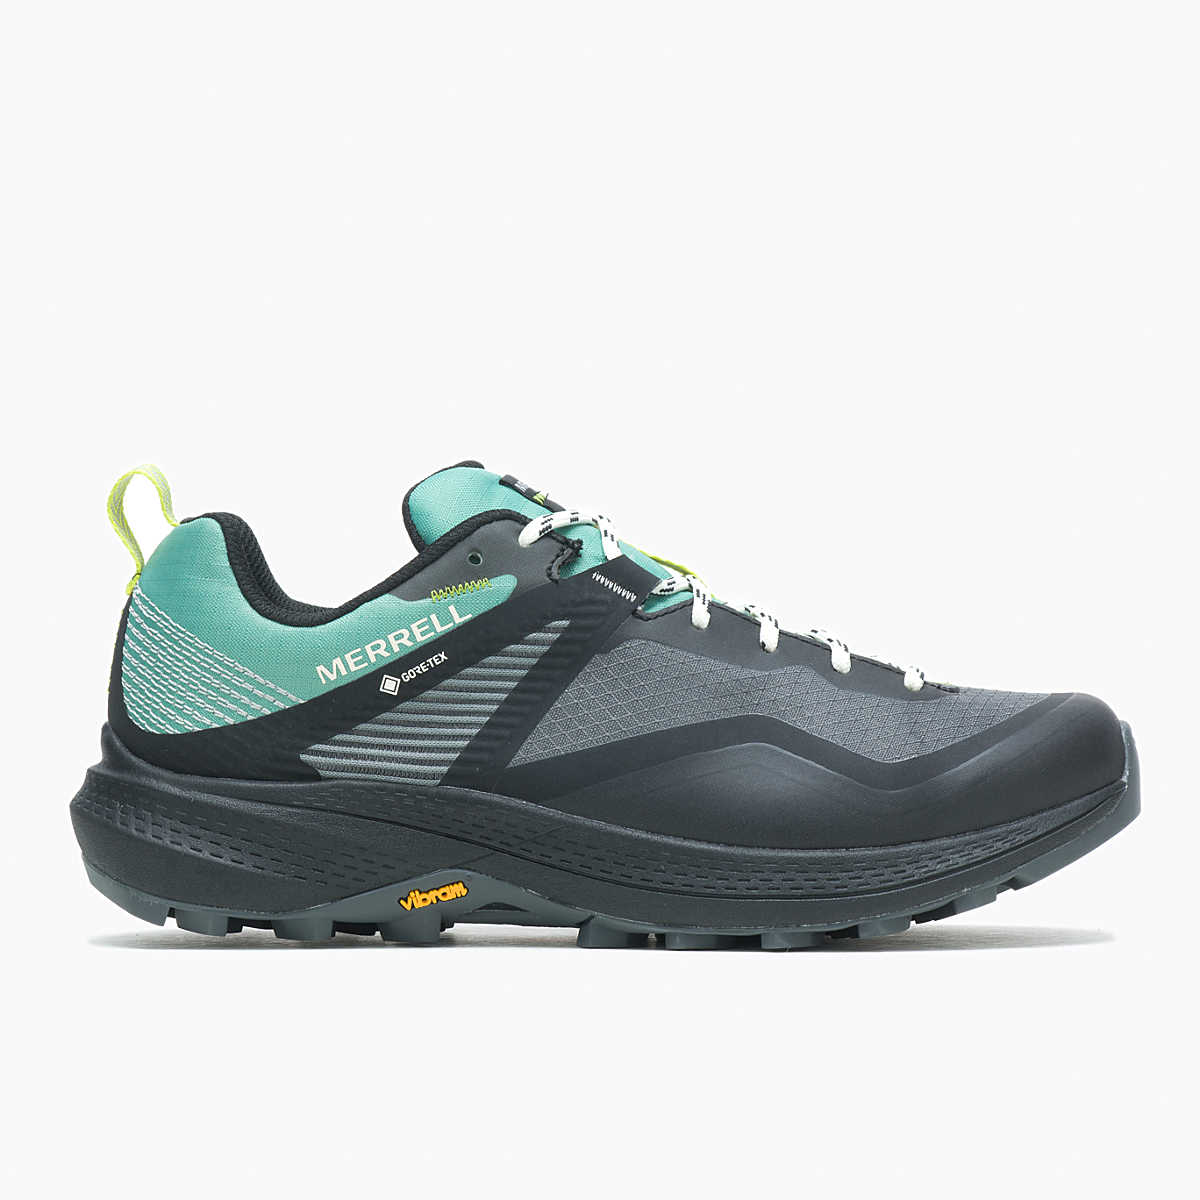 Merrell Women's MQM 3 GORE-TEX Shoes or MTL Mom Shoes $85 & More + Free Shipping